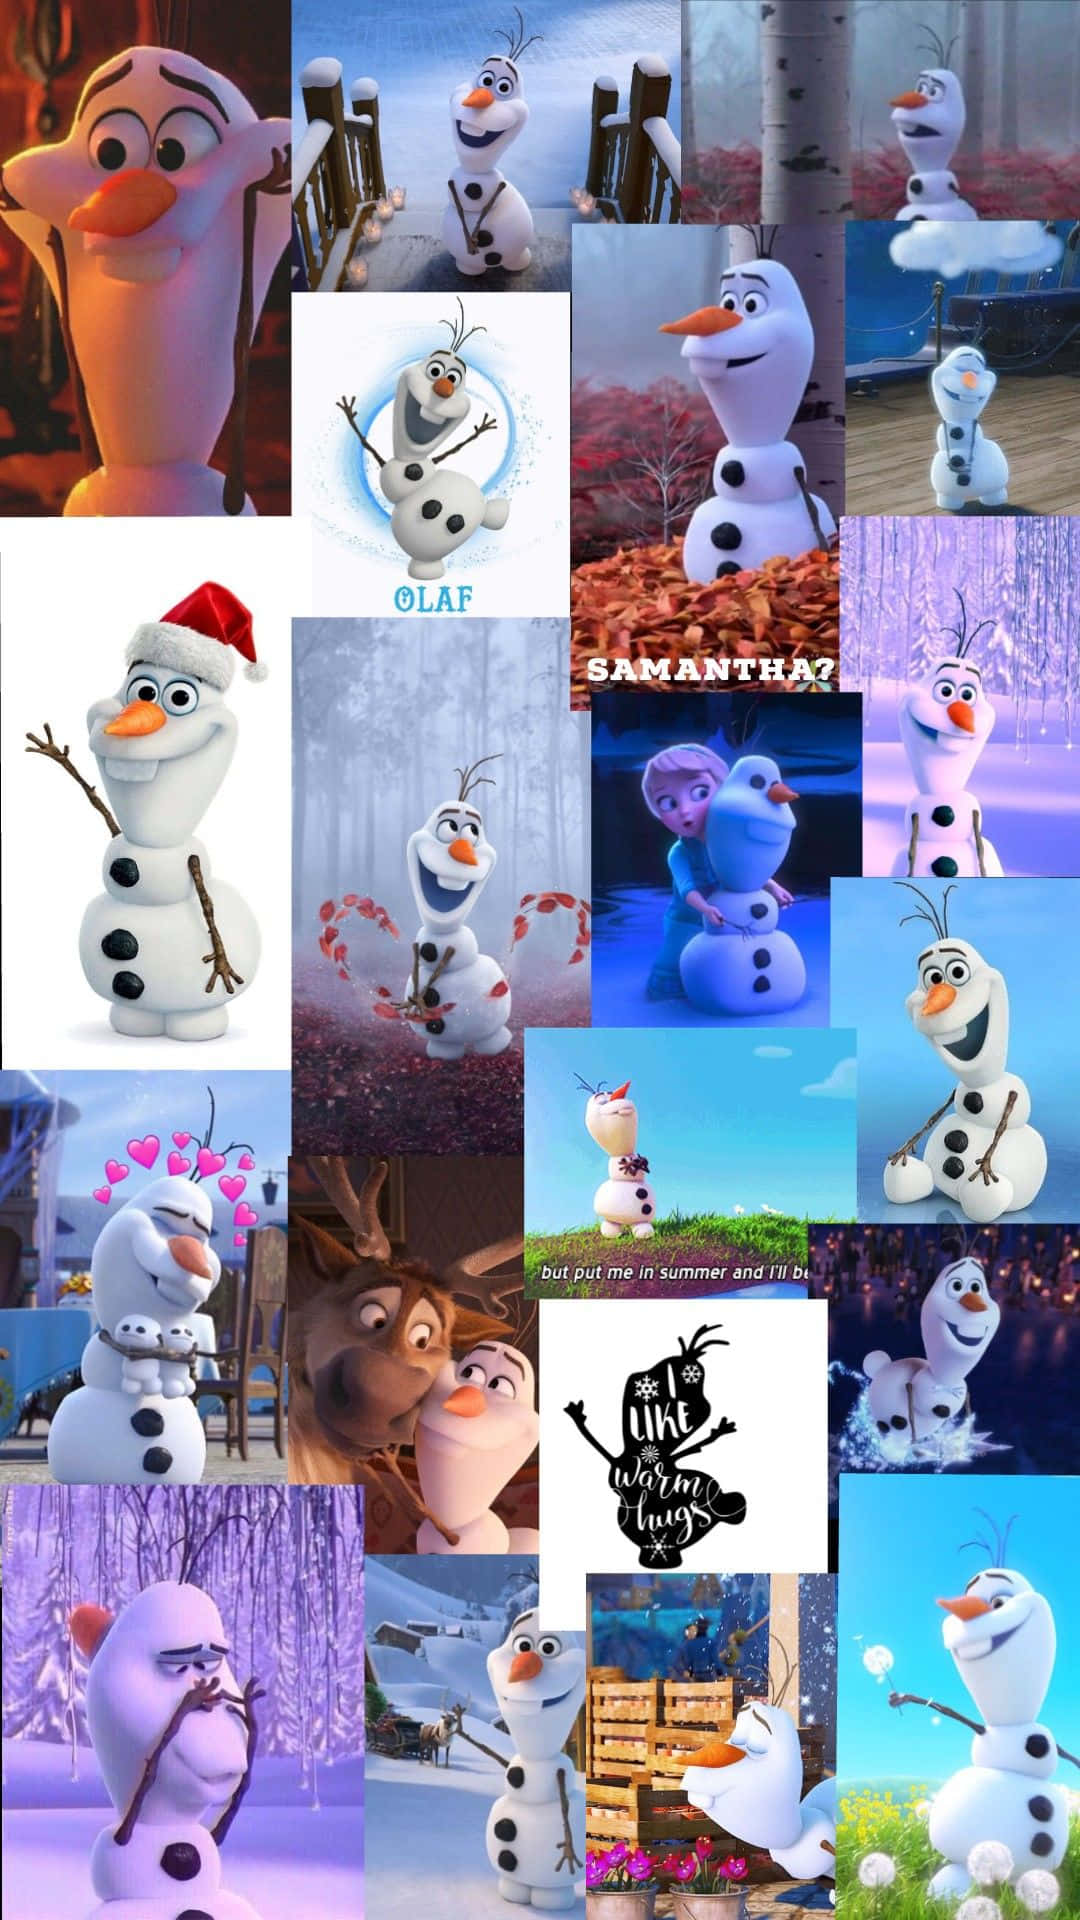 Download The Most Adorable Olaf Wallpaper | Wallpapers.com